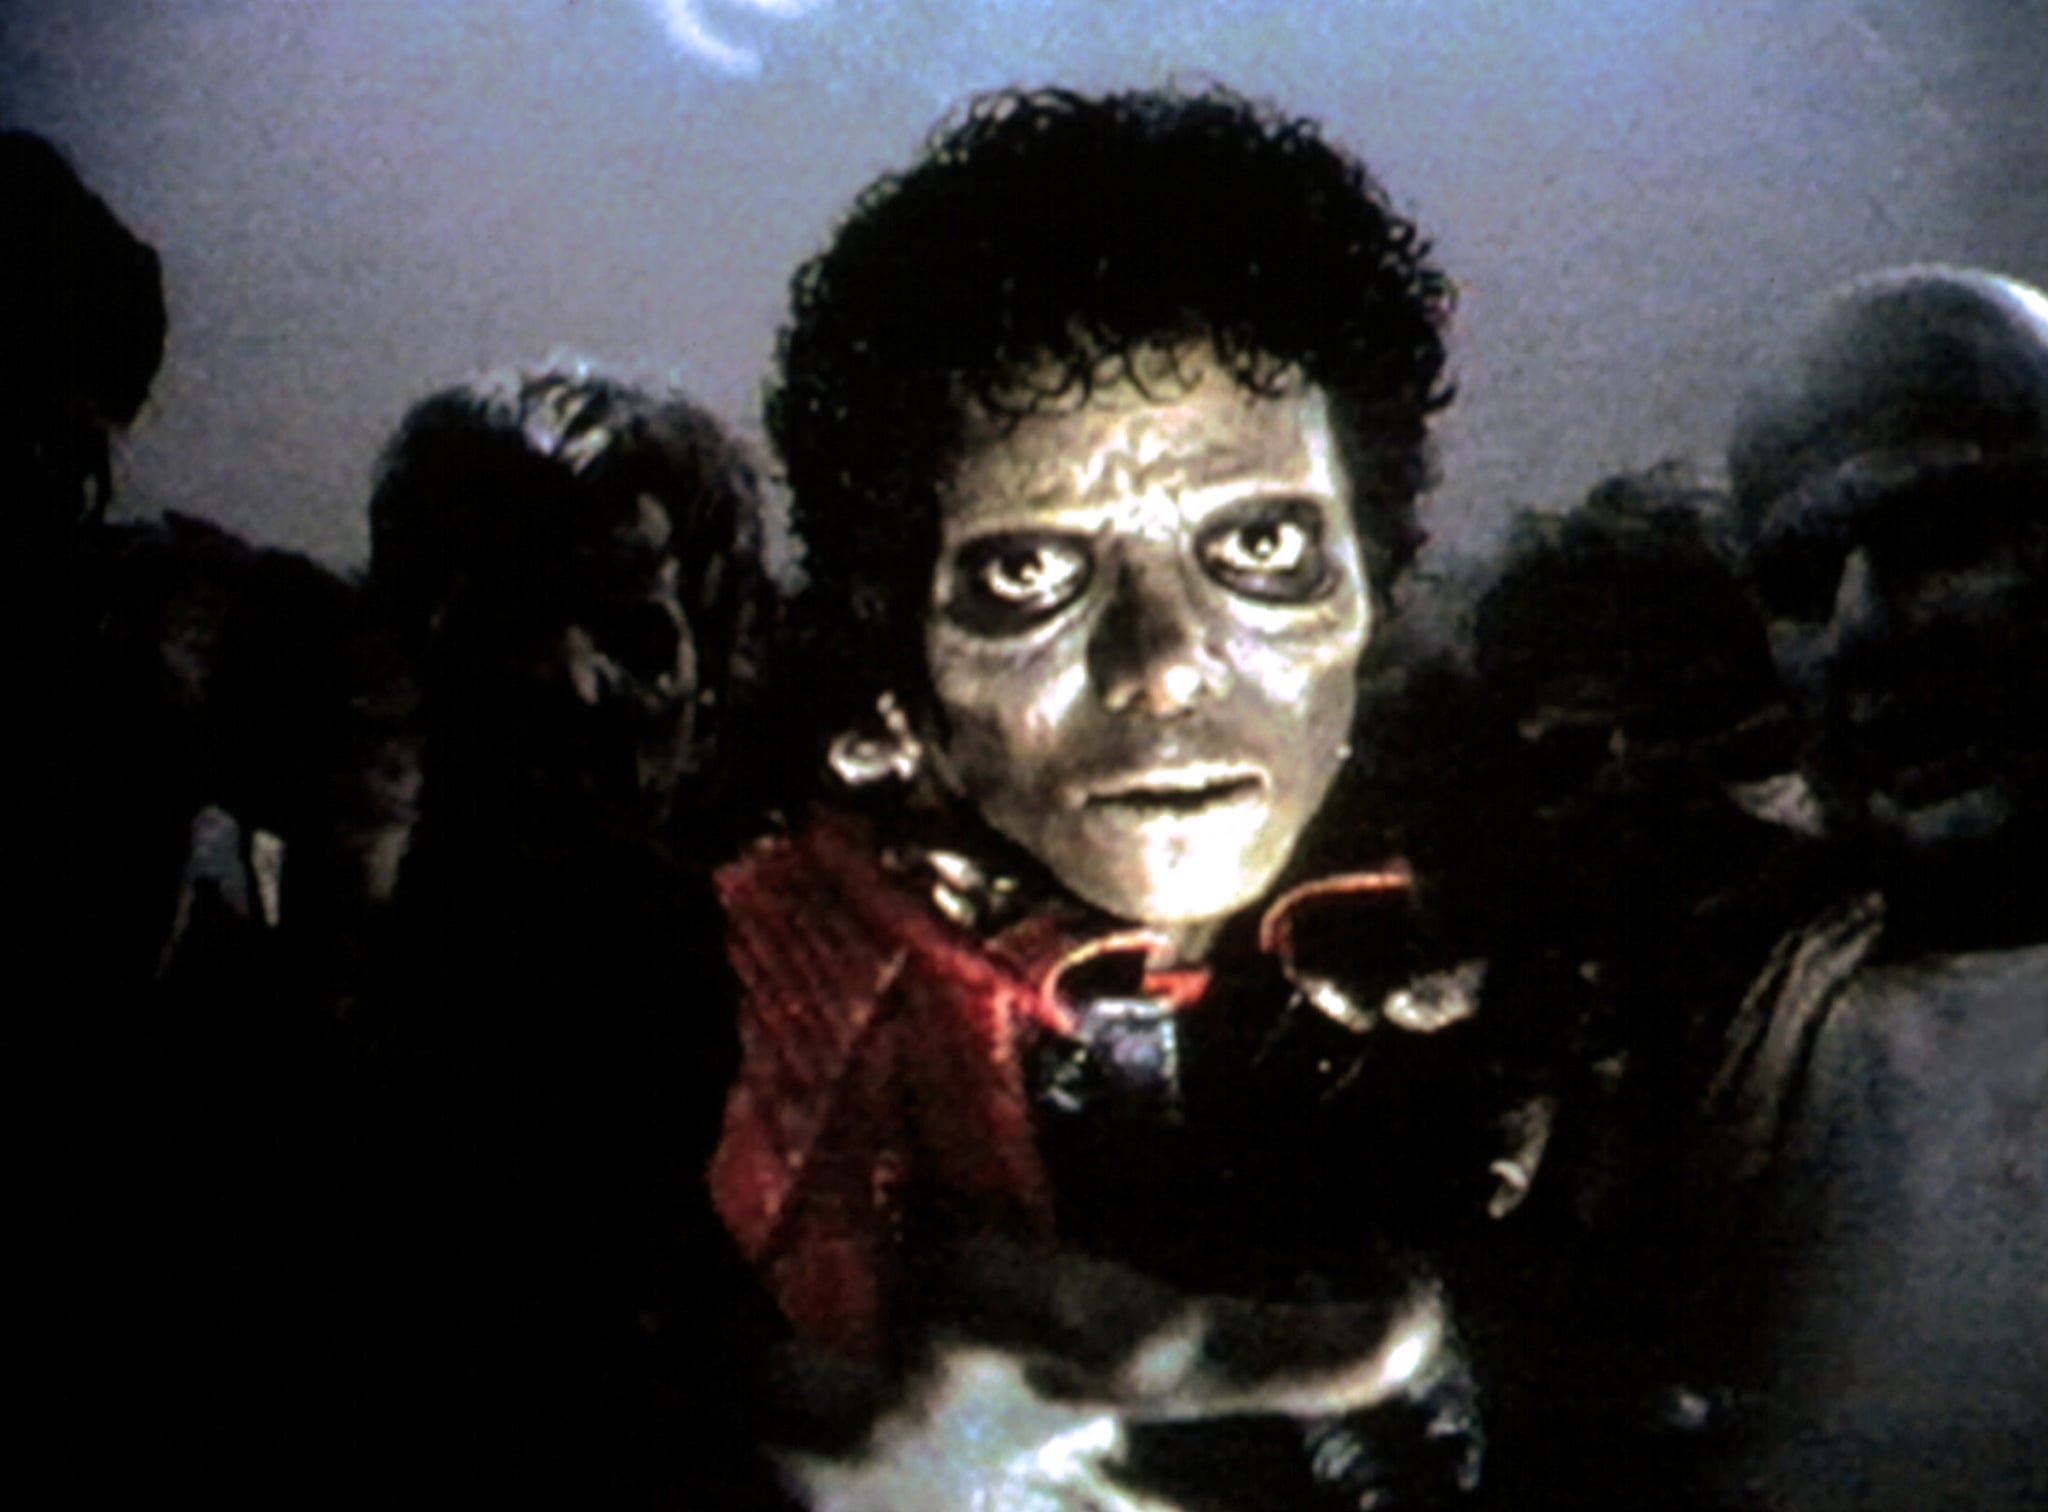 Michael Jackson in the THRILLER music video, 1983